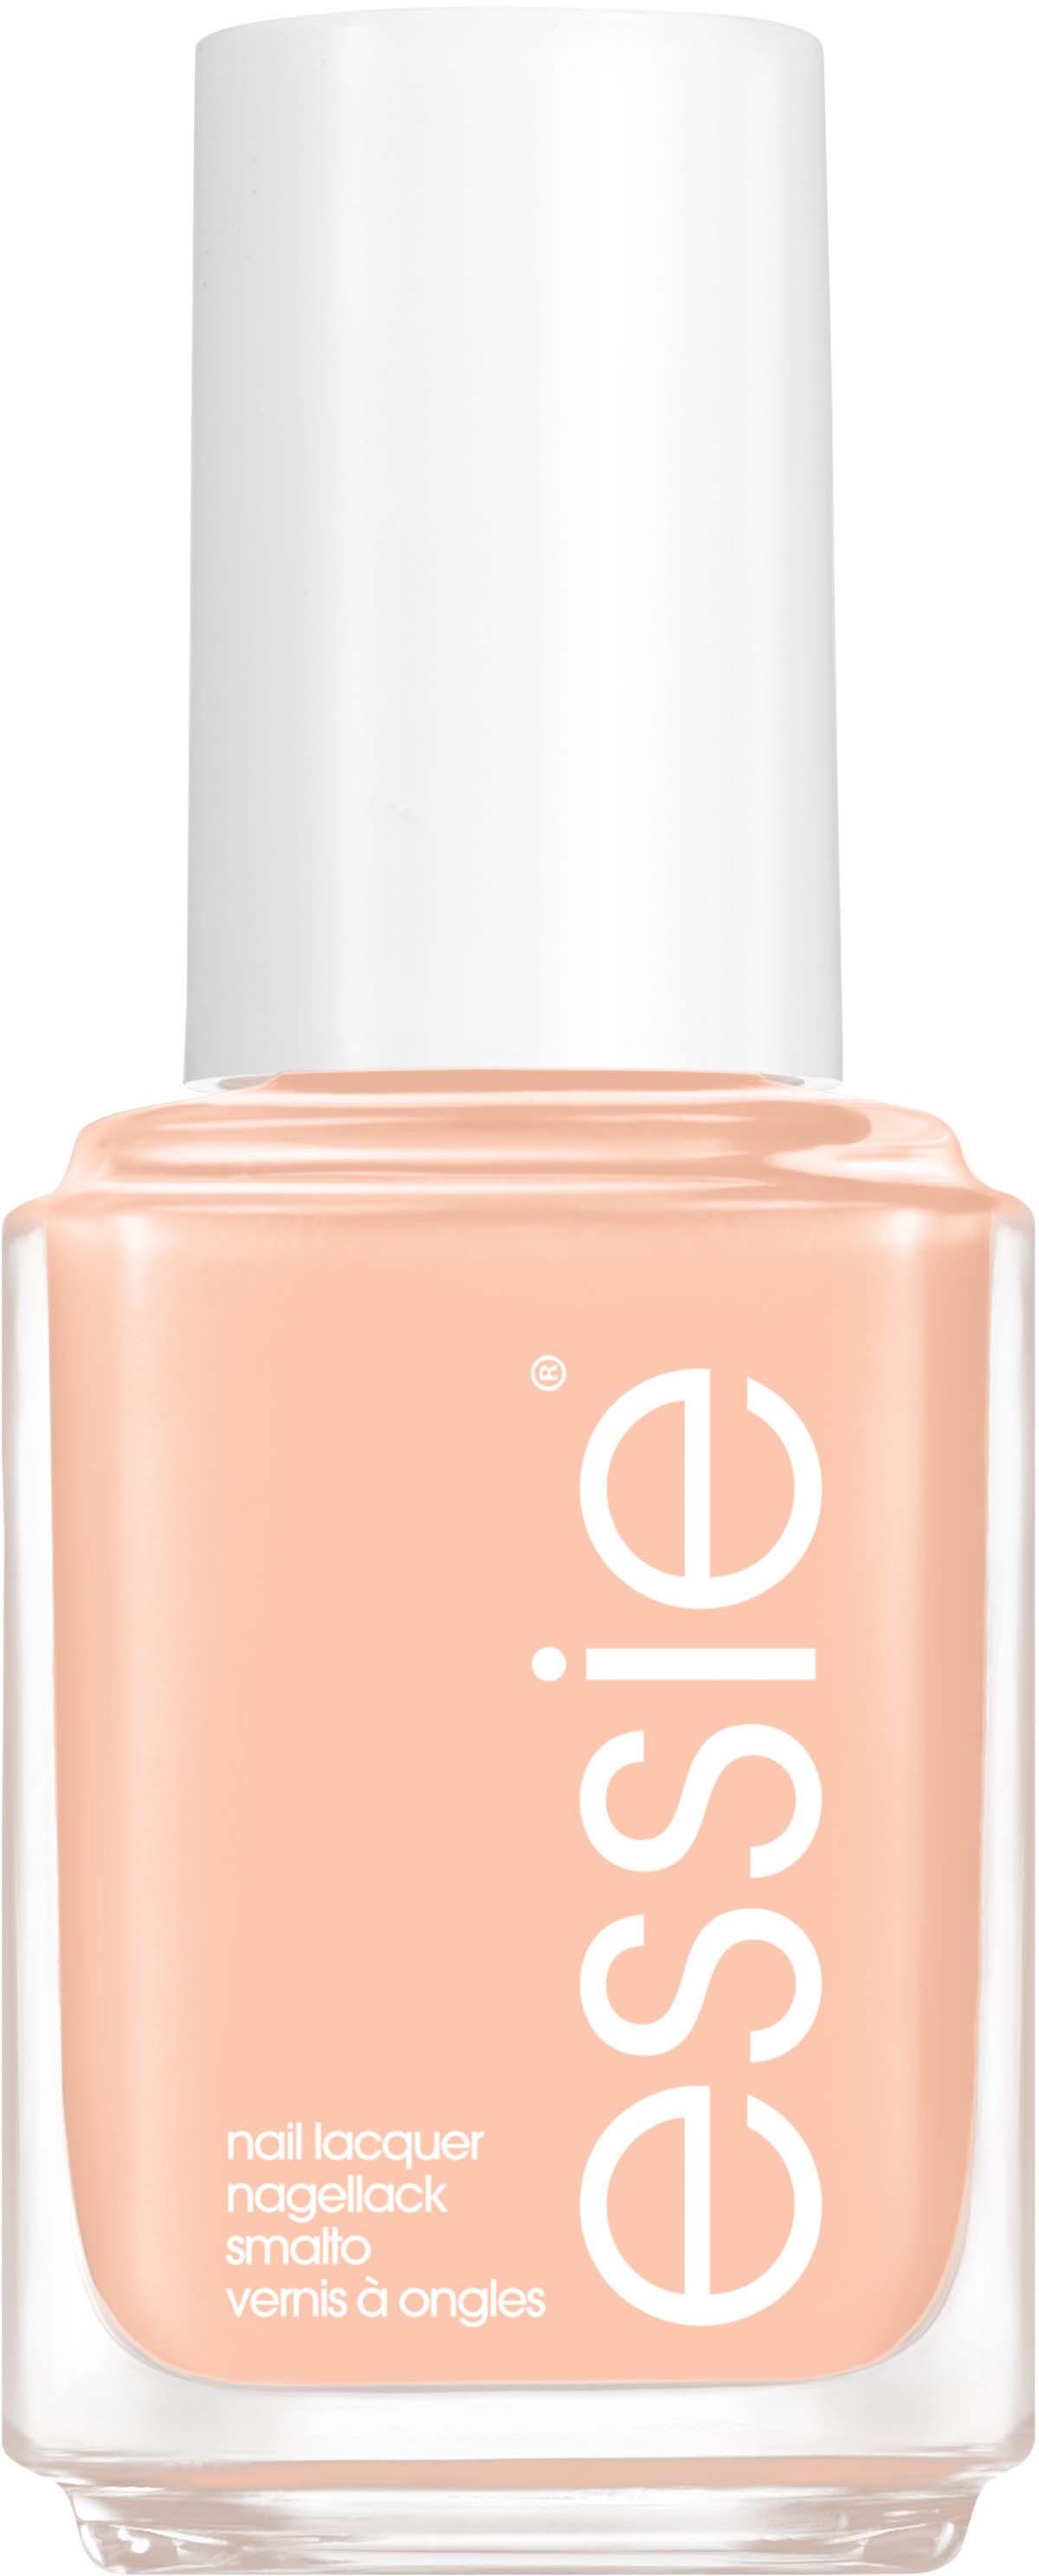 Essie Summer Collection Nail Lacquer 874 Vine And Dandy